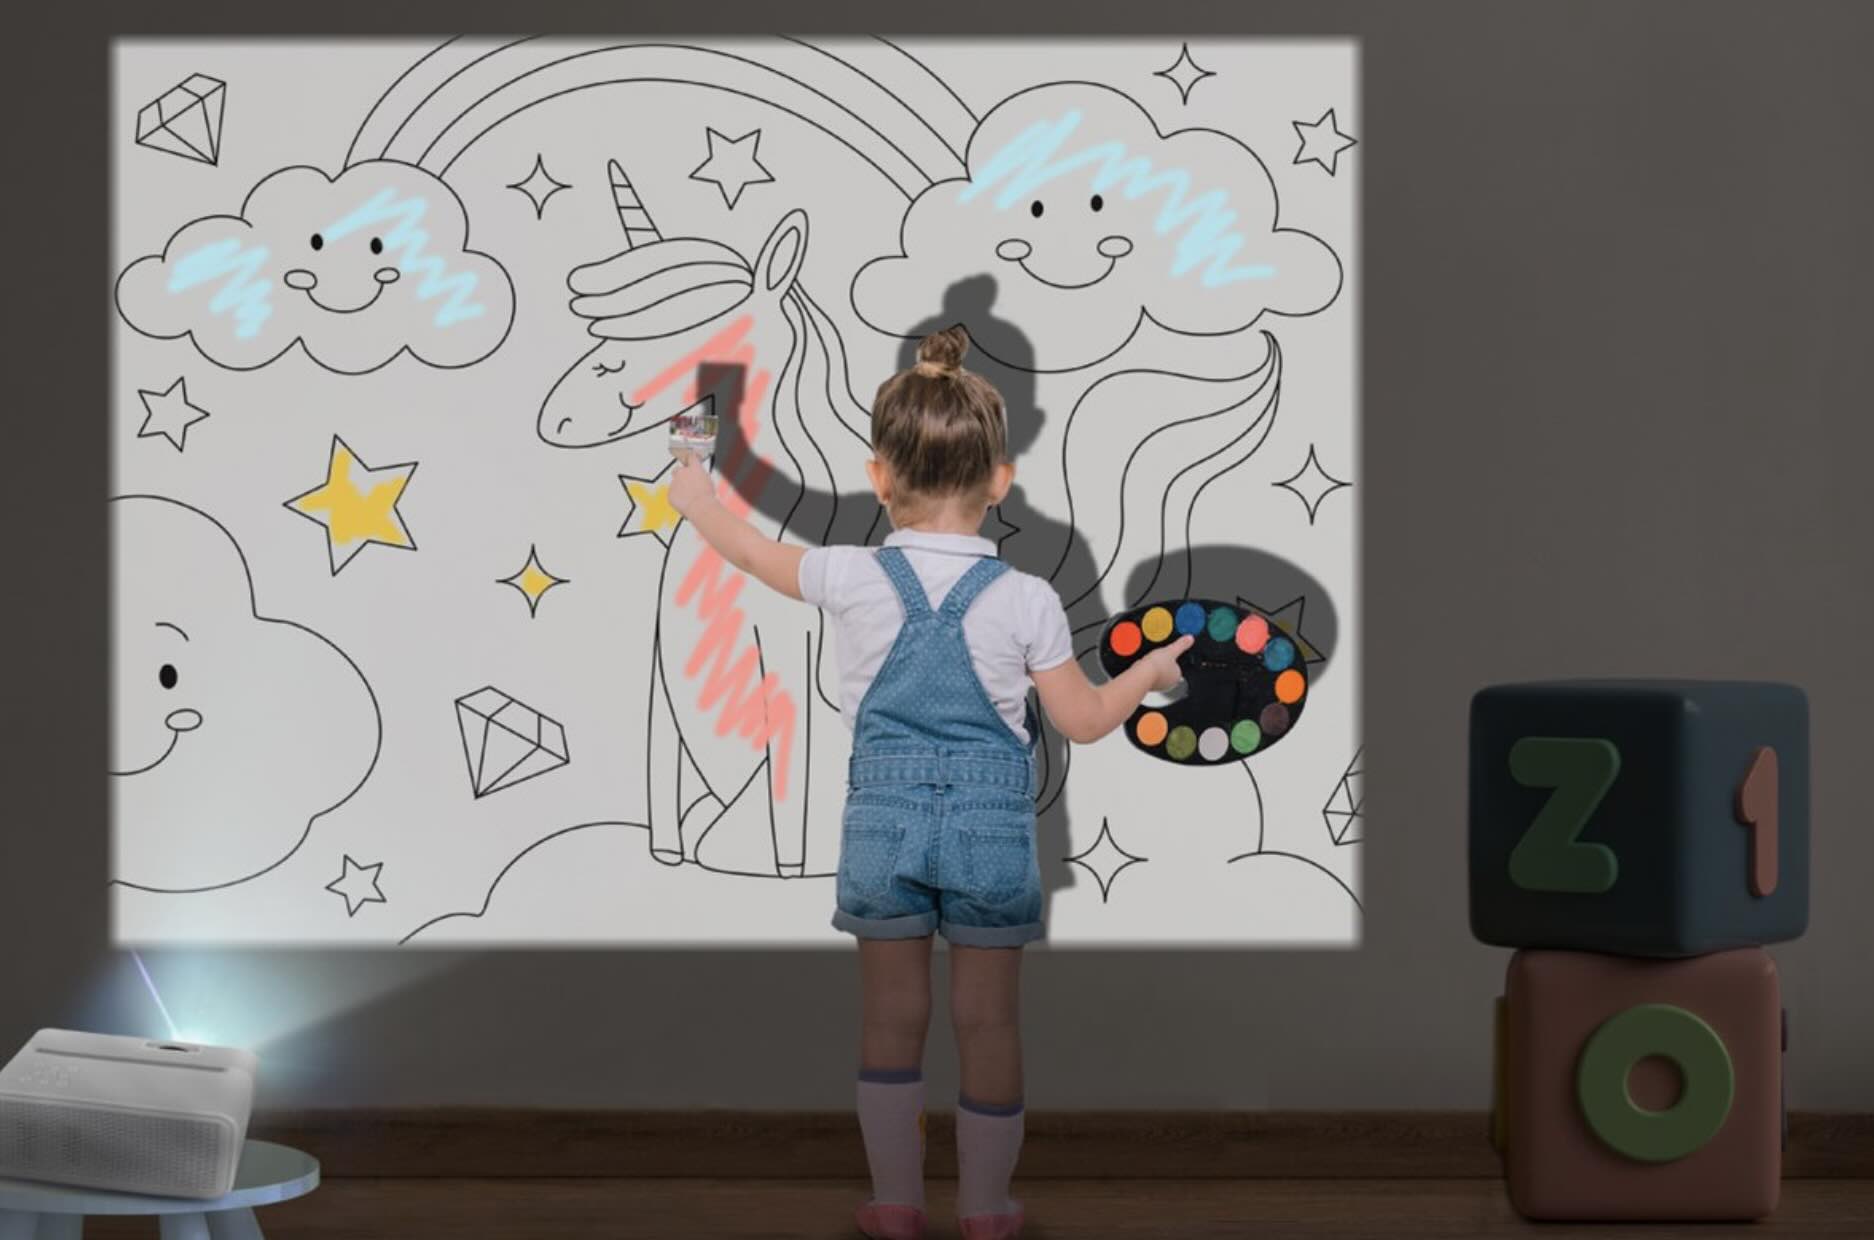 How To Use A Projector To Trace Art